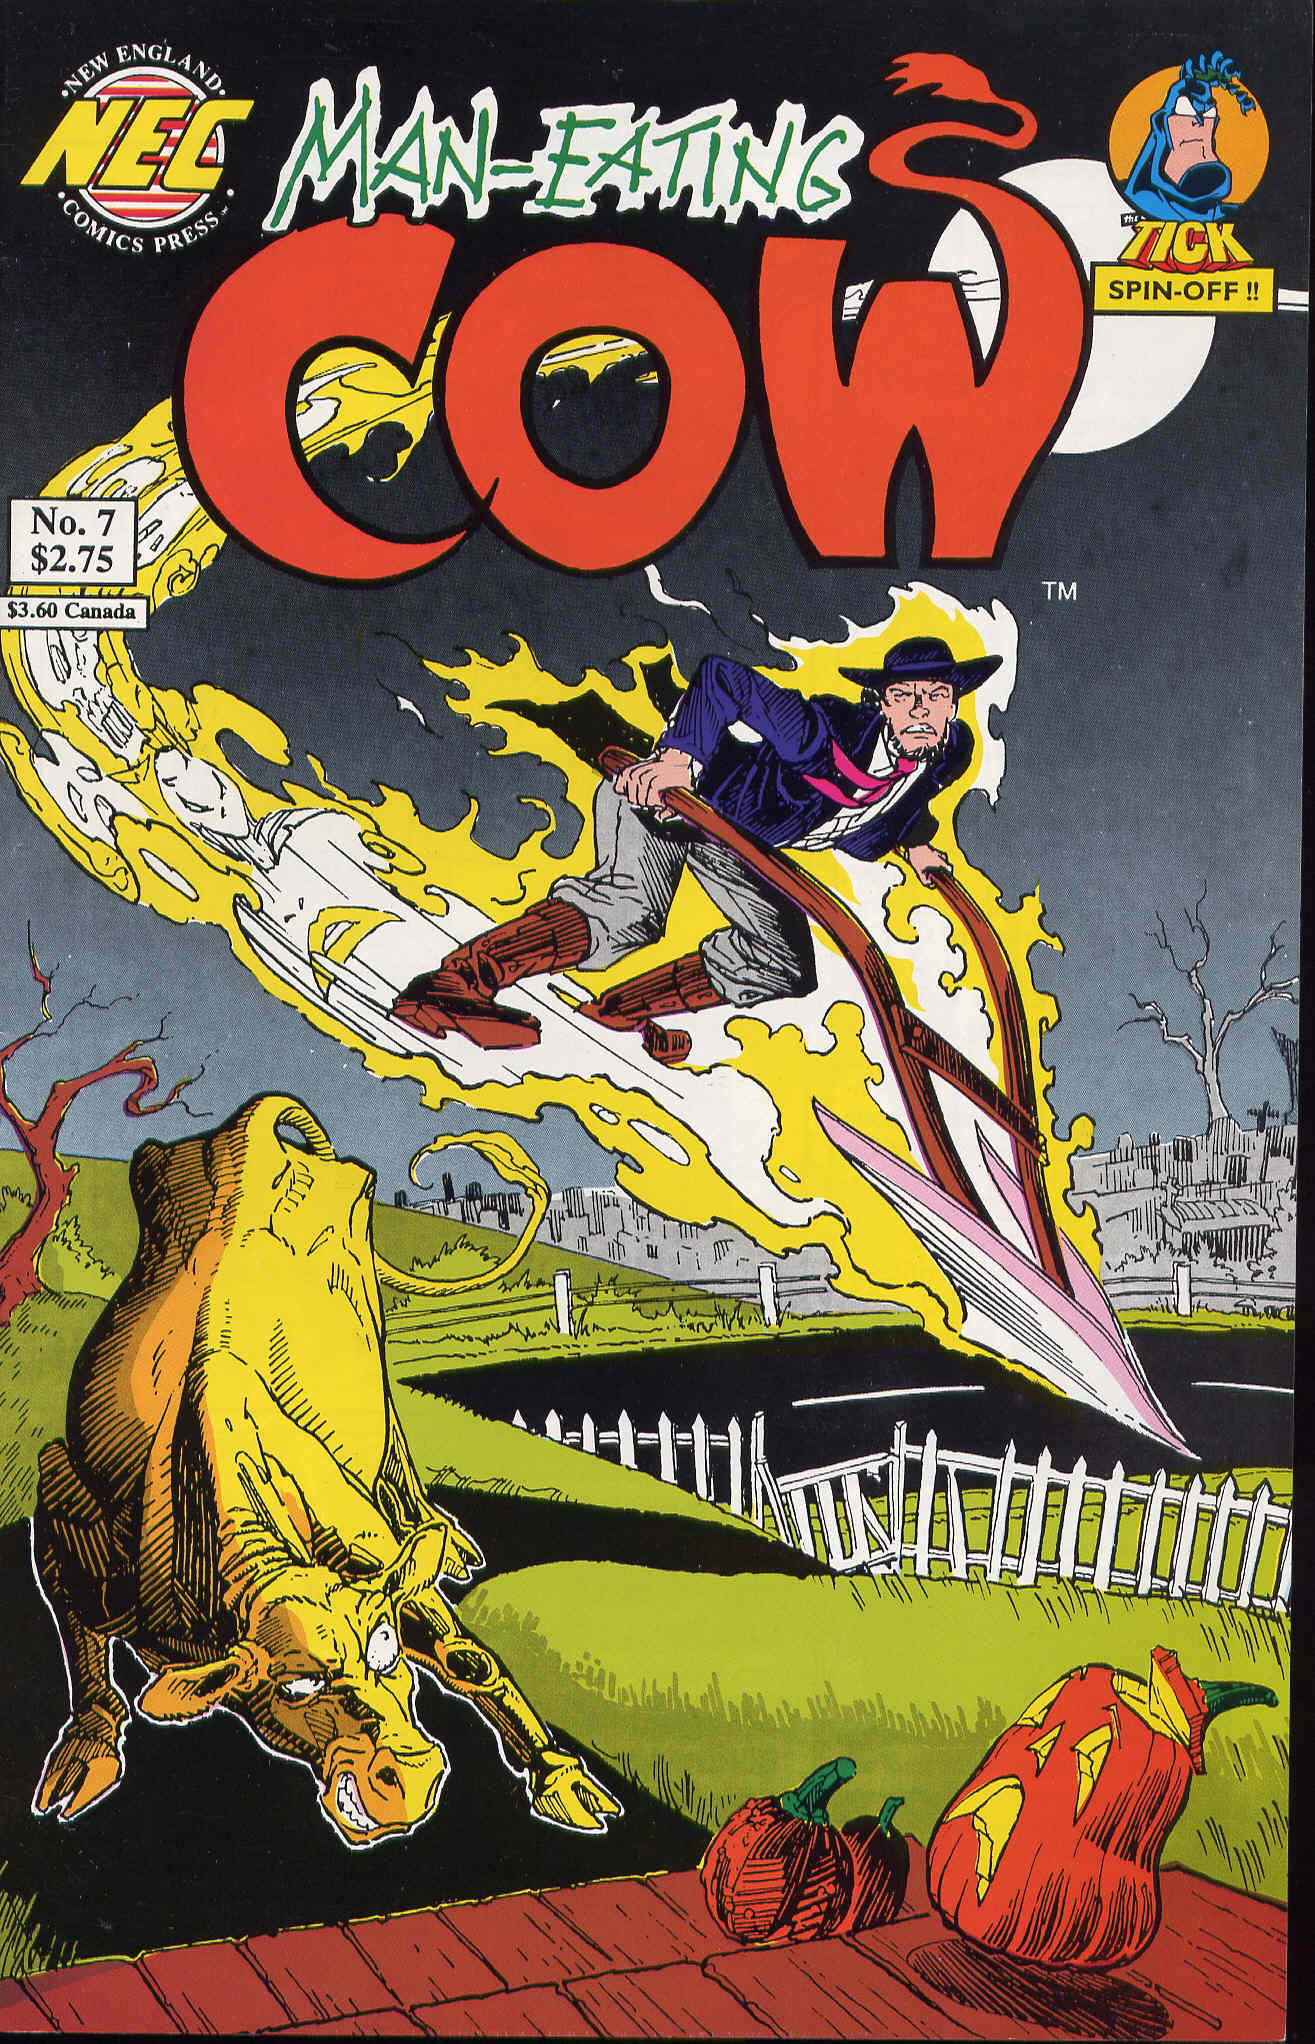 Read online Man-Eating Cow comic -  Issue #7 - 1